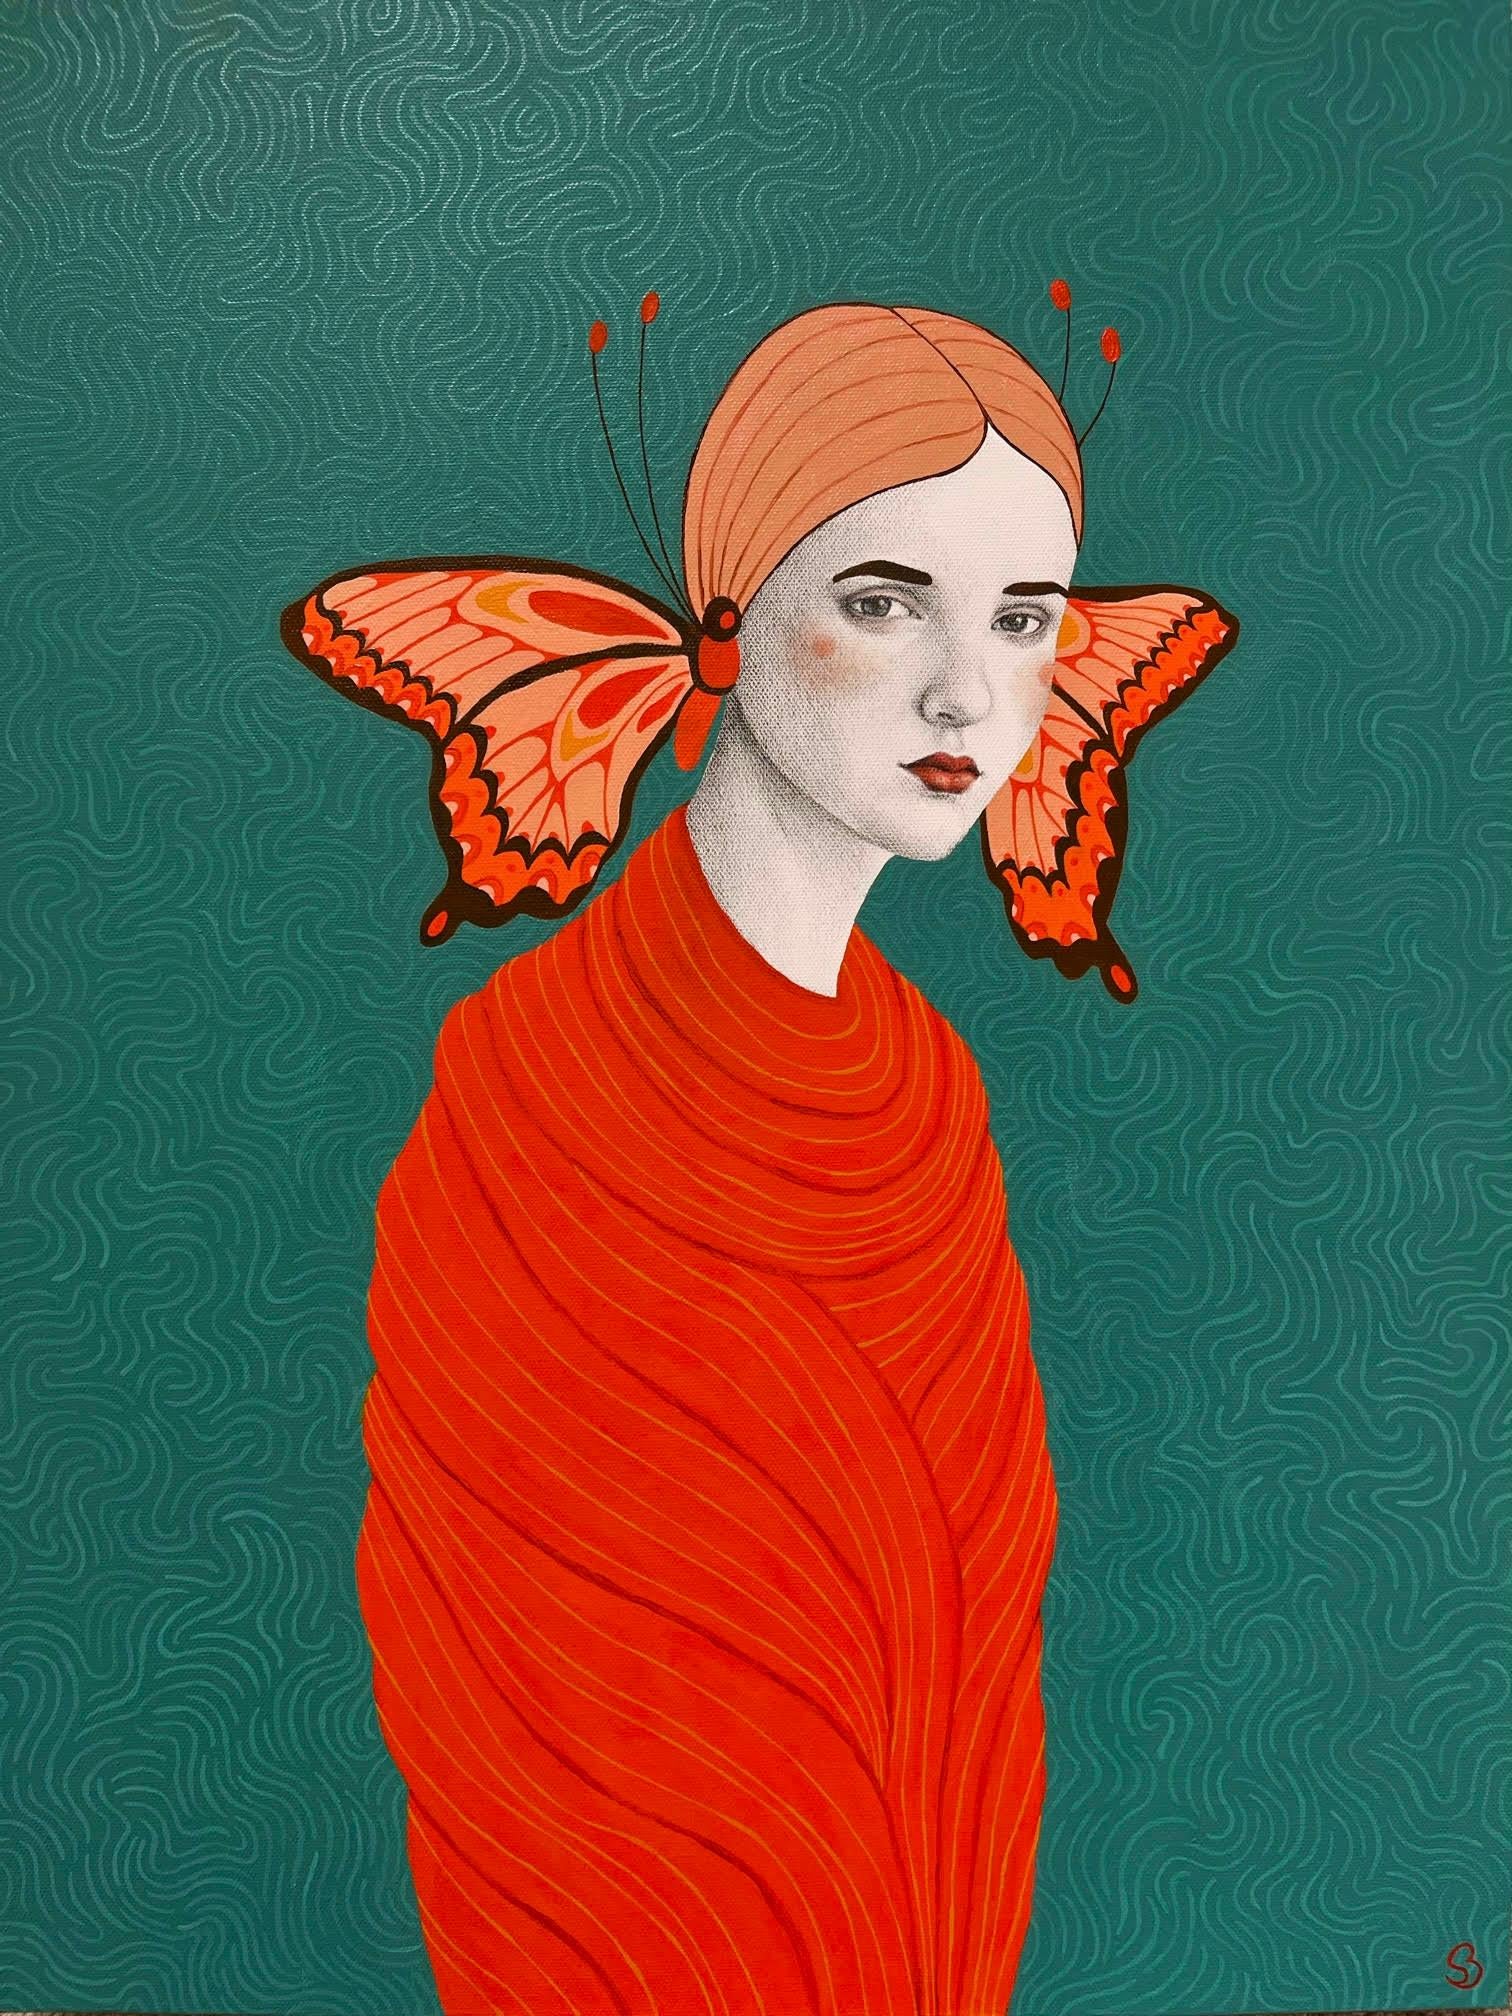 Sofia Bonati Figurative Painting - "Athalia" acrylic portrait painting of a girl wrapped in orange, butterfly wings